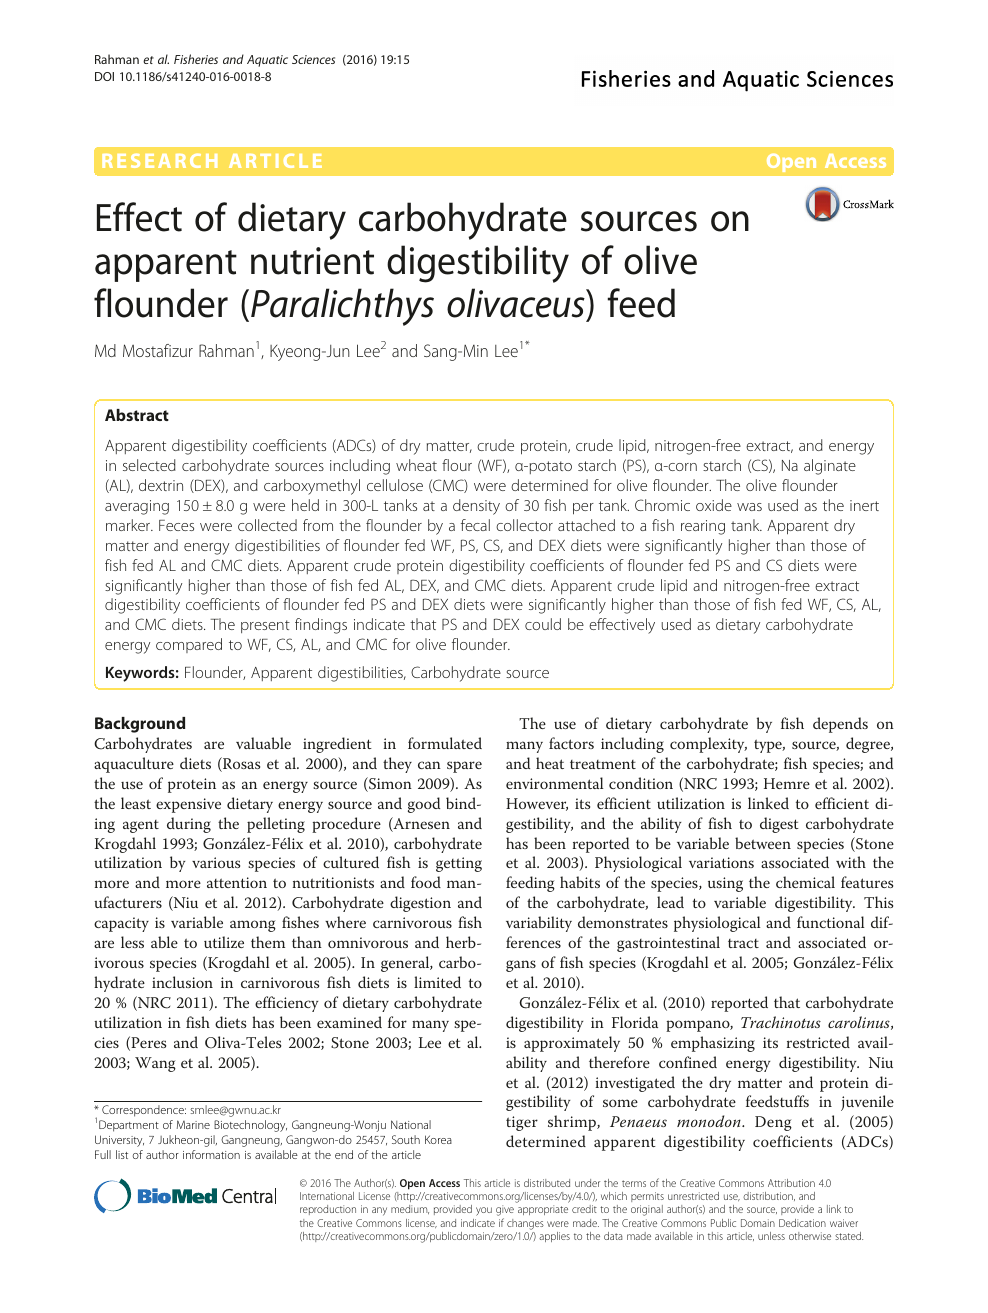 Effect of dietary carbohydrate sources on apparent nutrient digestibility  of olive flounder (Paralichthys olivaceus) feed – topic of research paper  in Animal and dairy science. Download scholarly article PDF and read for